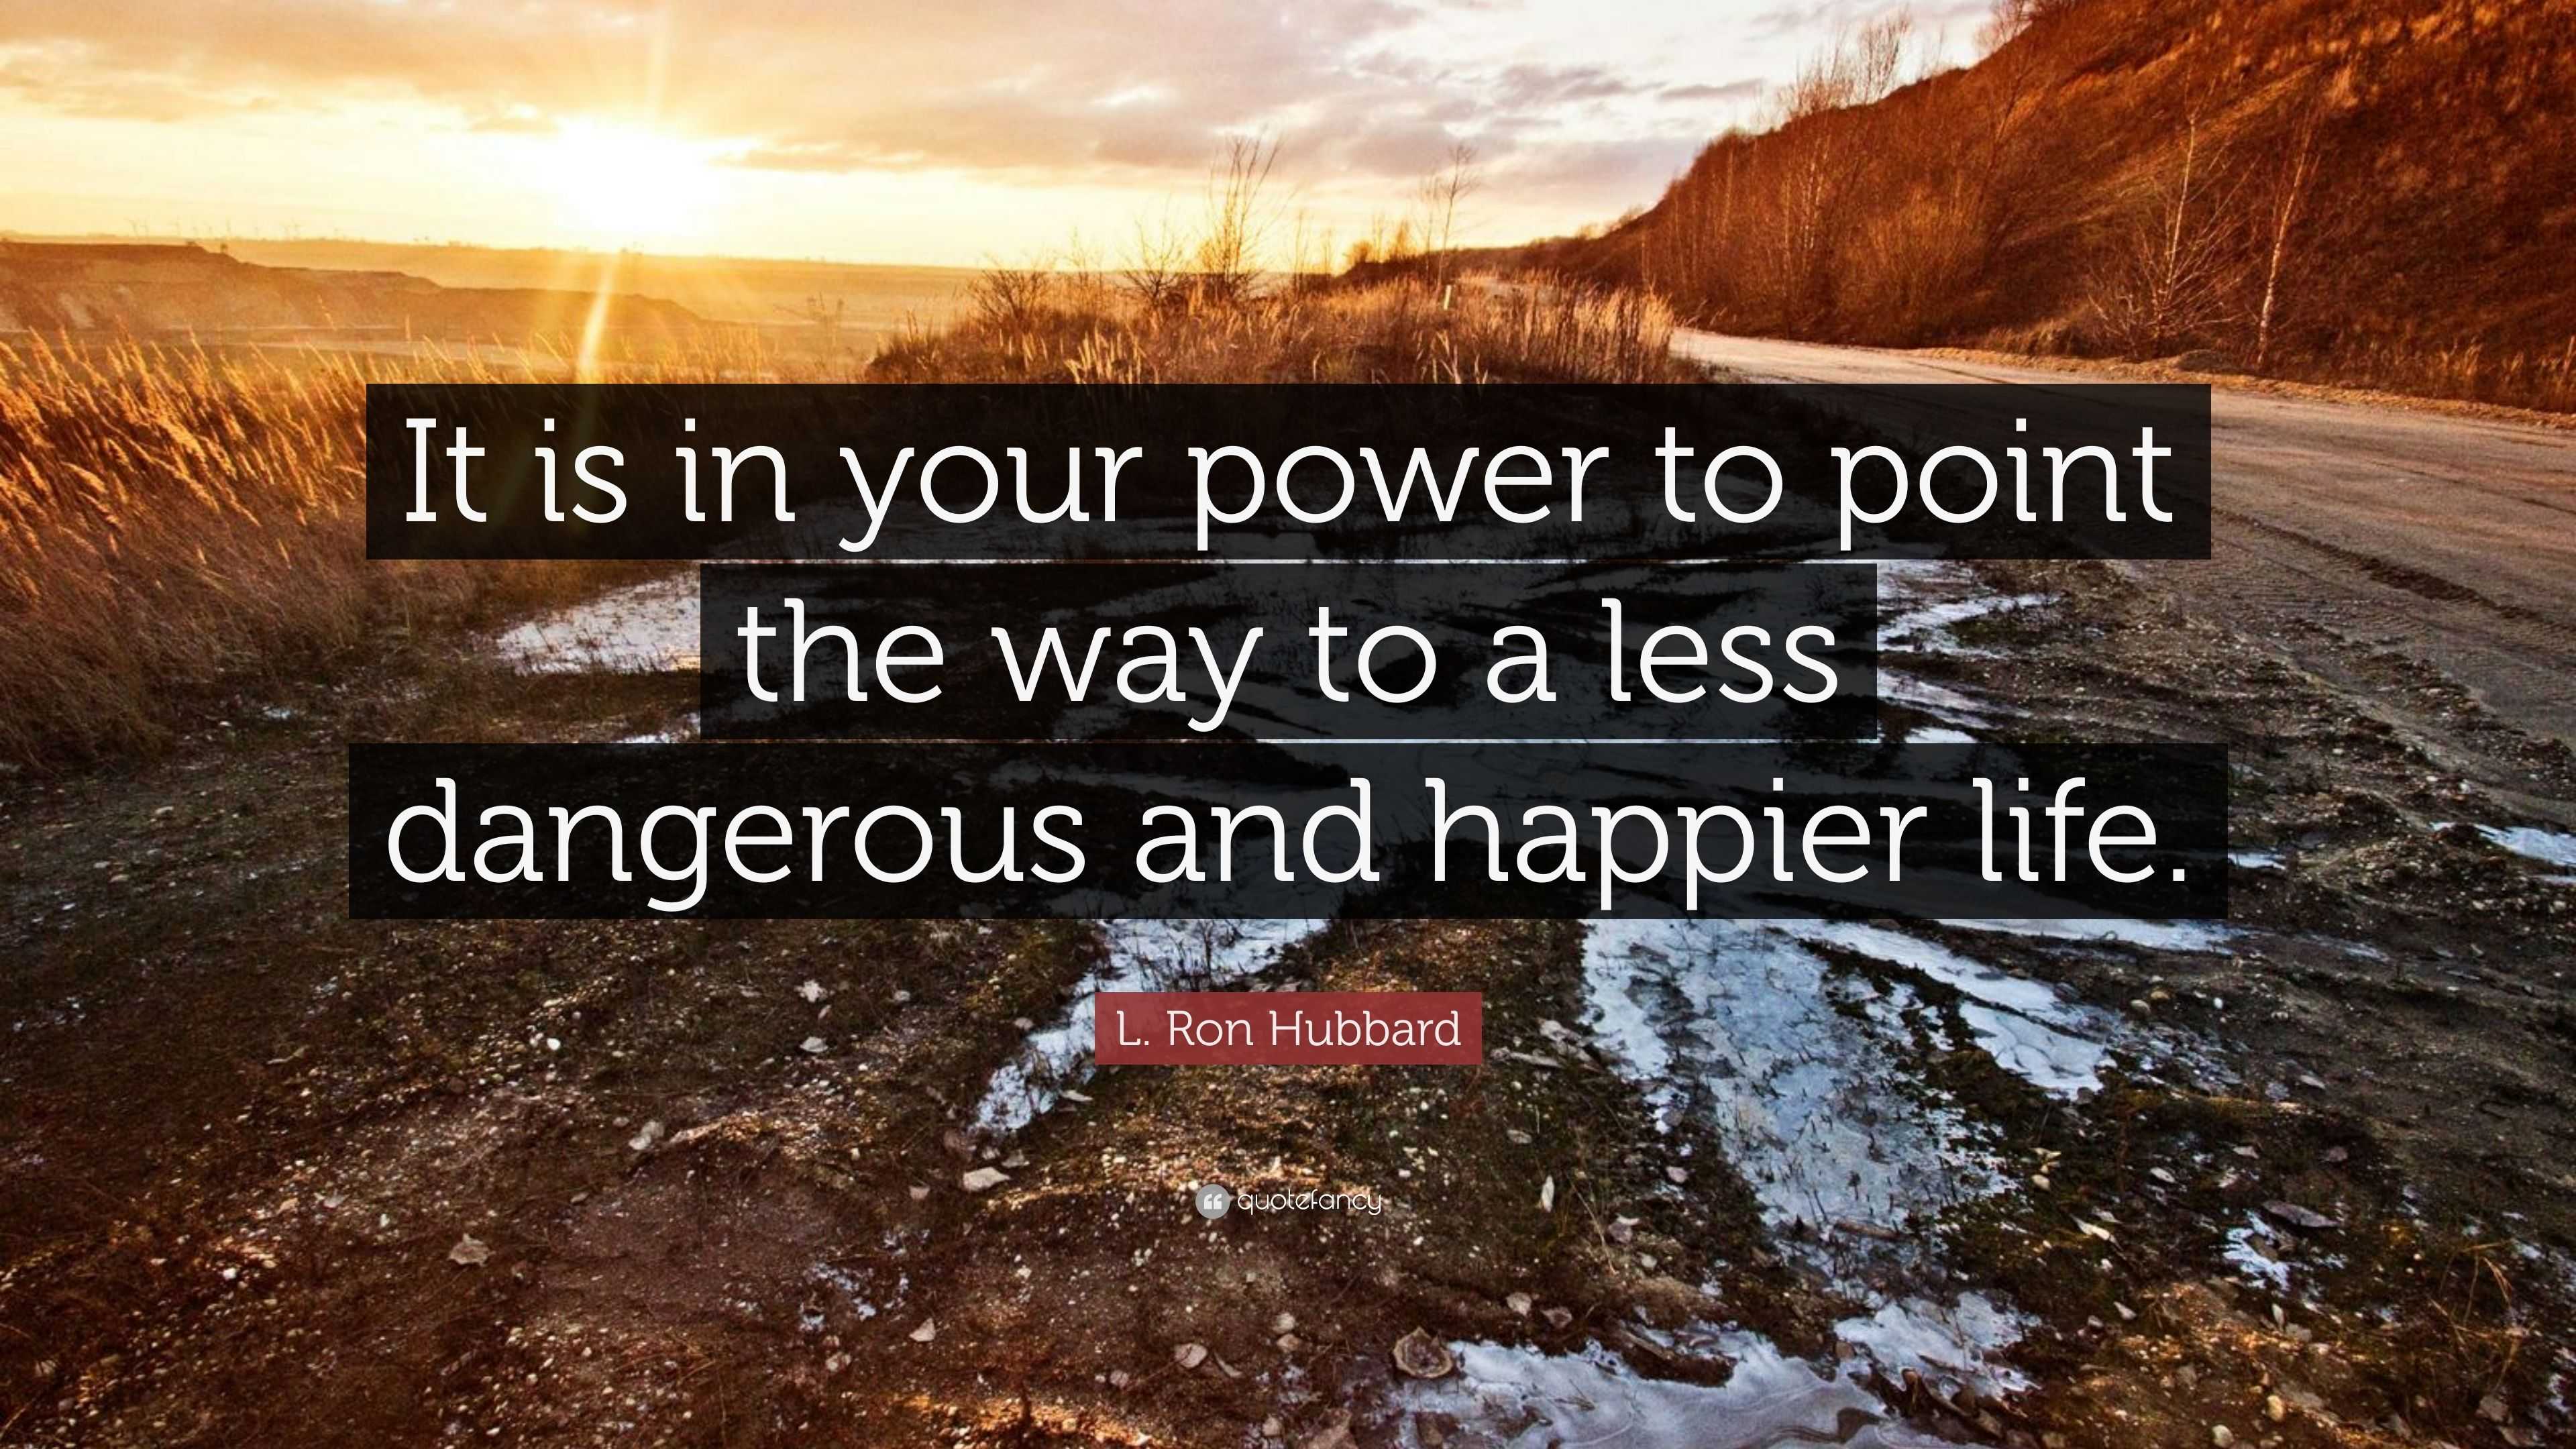 L. Ron Hubbard Quote: “It is in your power to point the way to a less ...